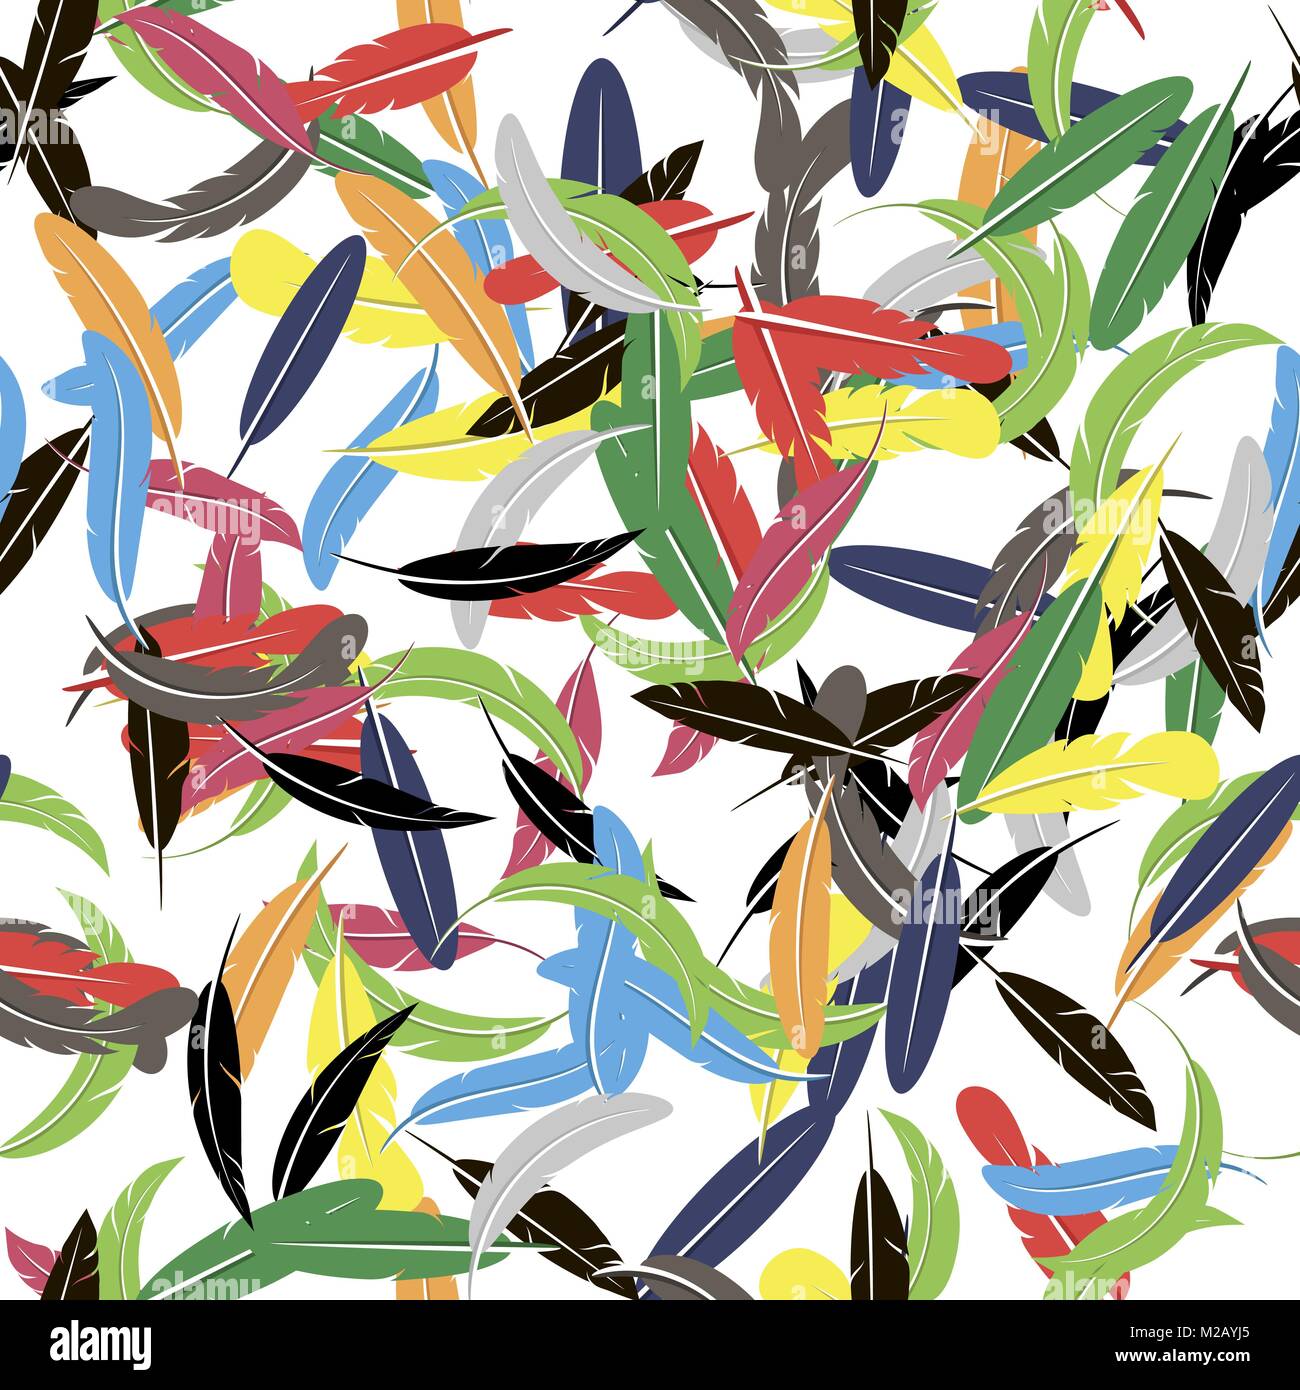 Colorful Seamless Random Feather Pattern Stock Vector